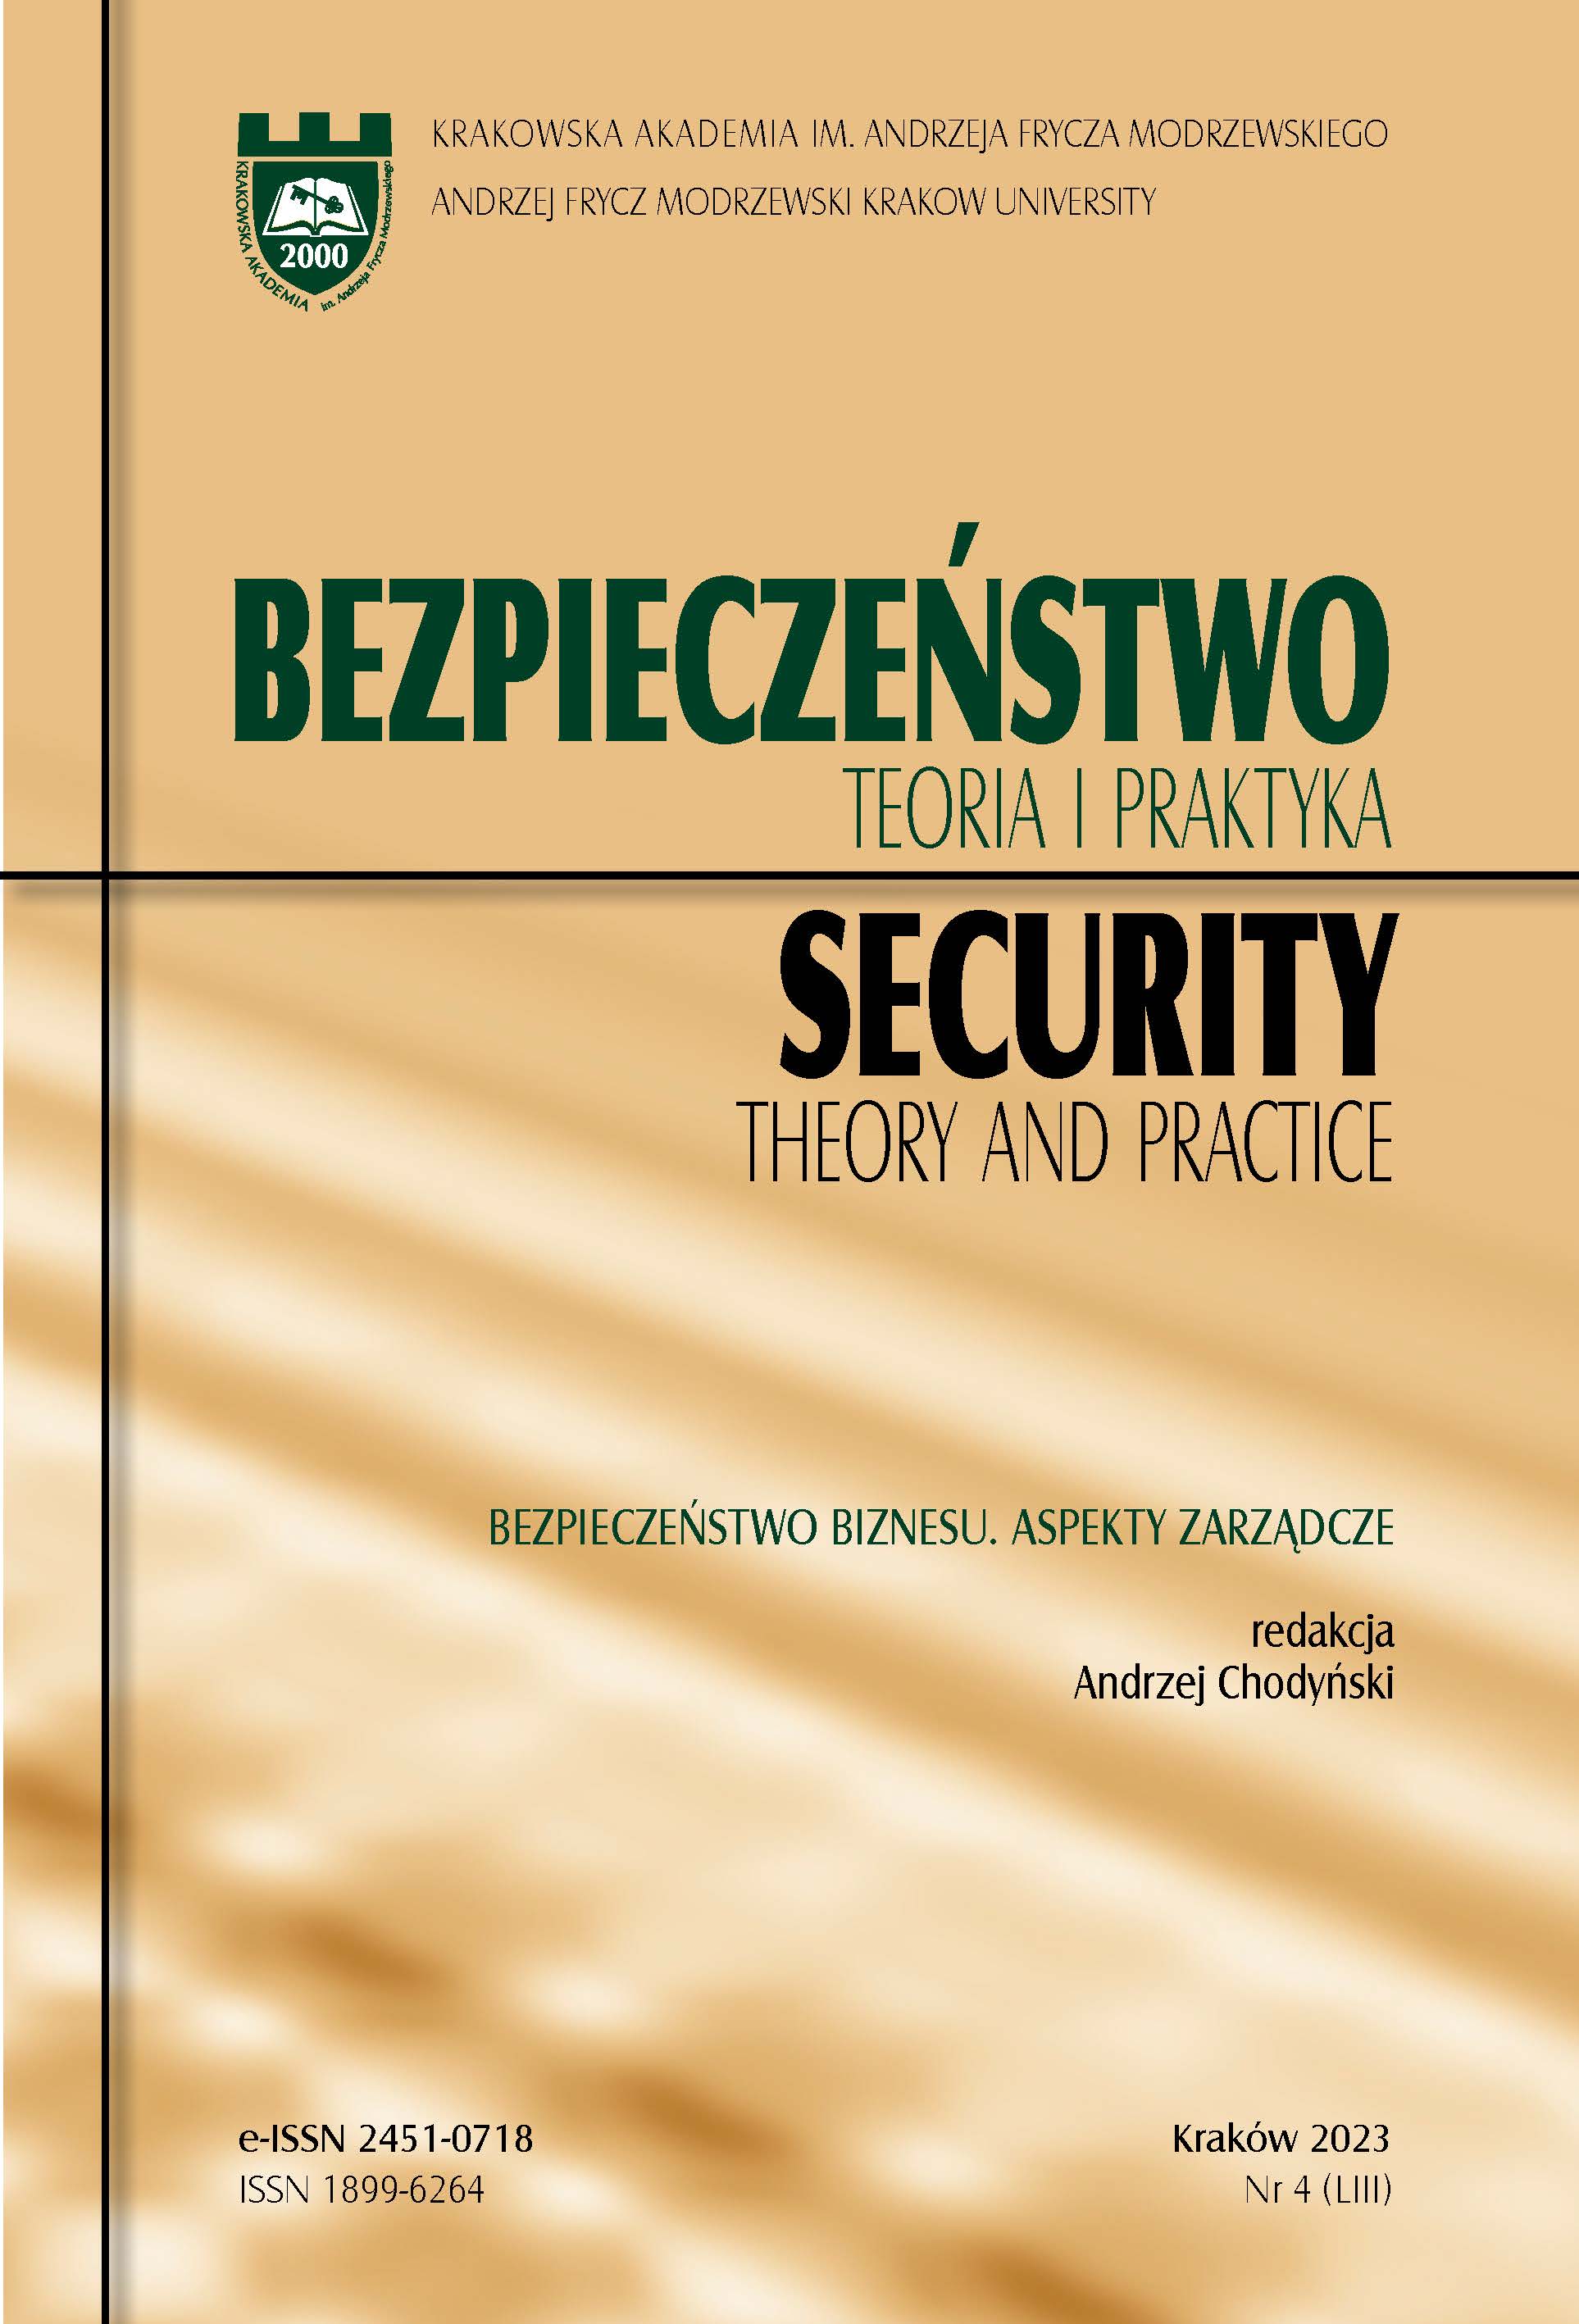 Organization security manager in a culturally changing environment: a theoretical and conceptual study Cover Image